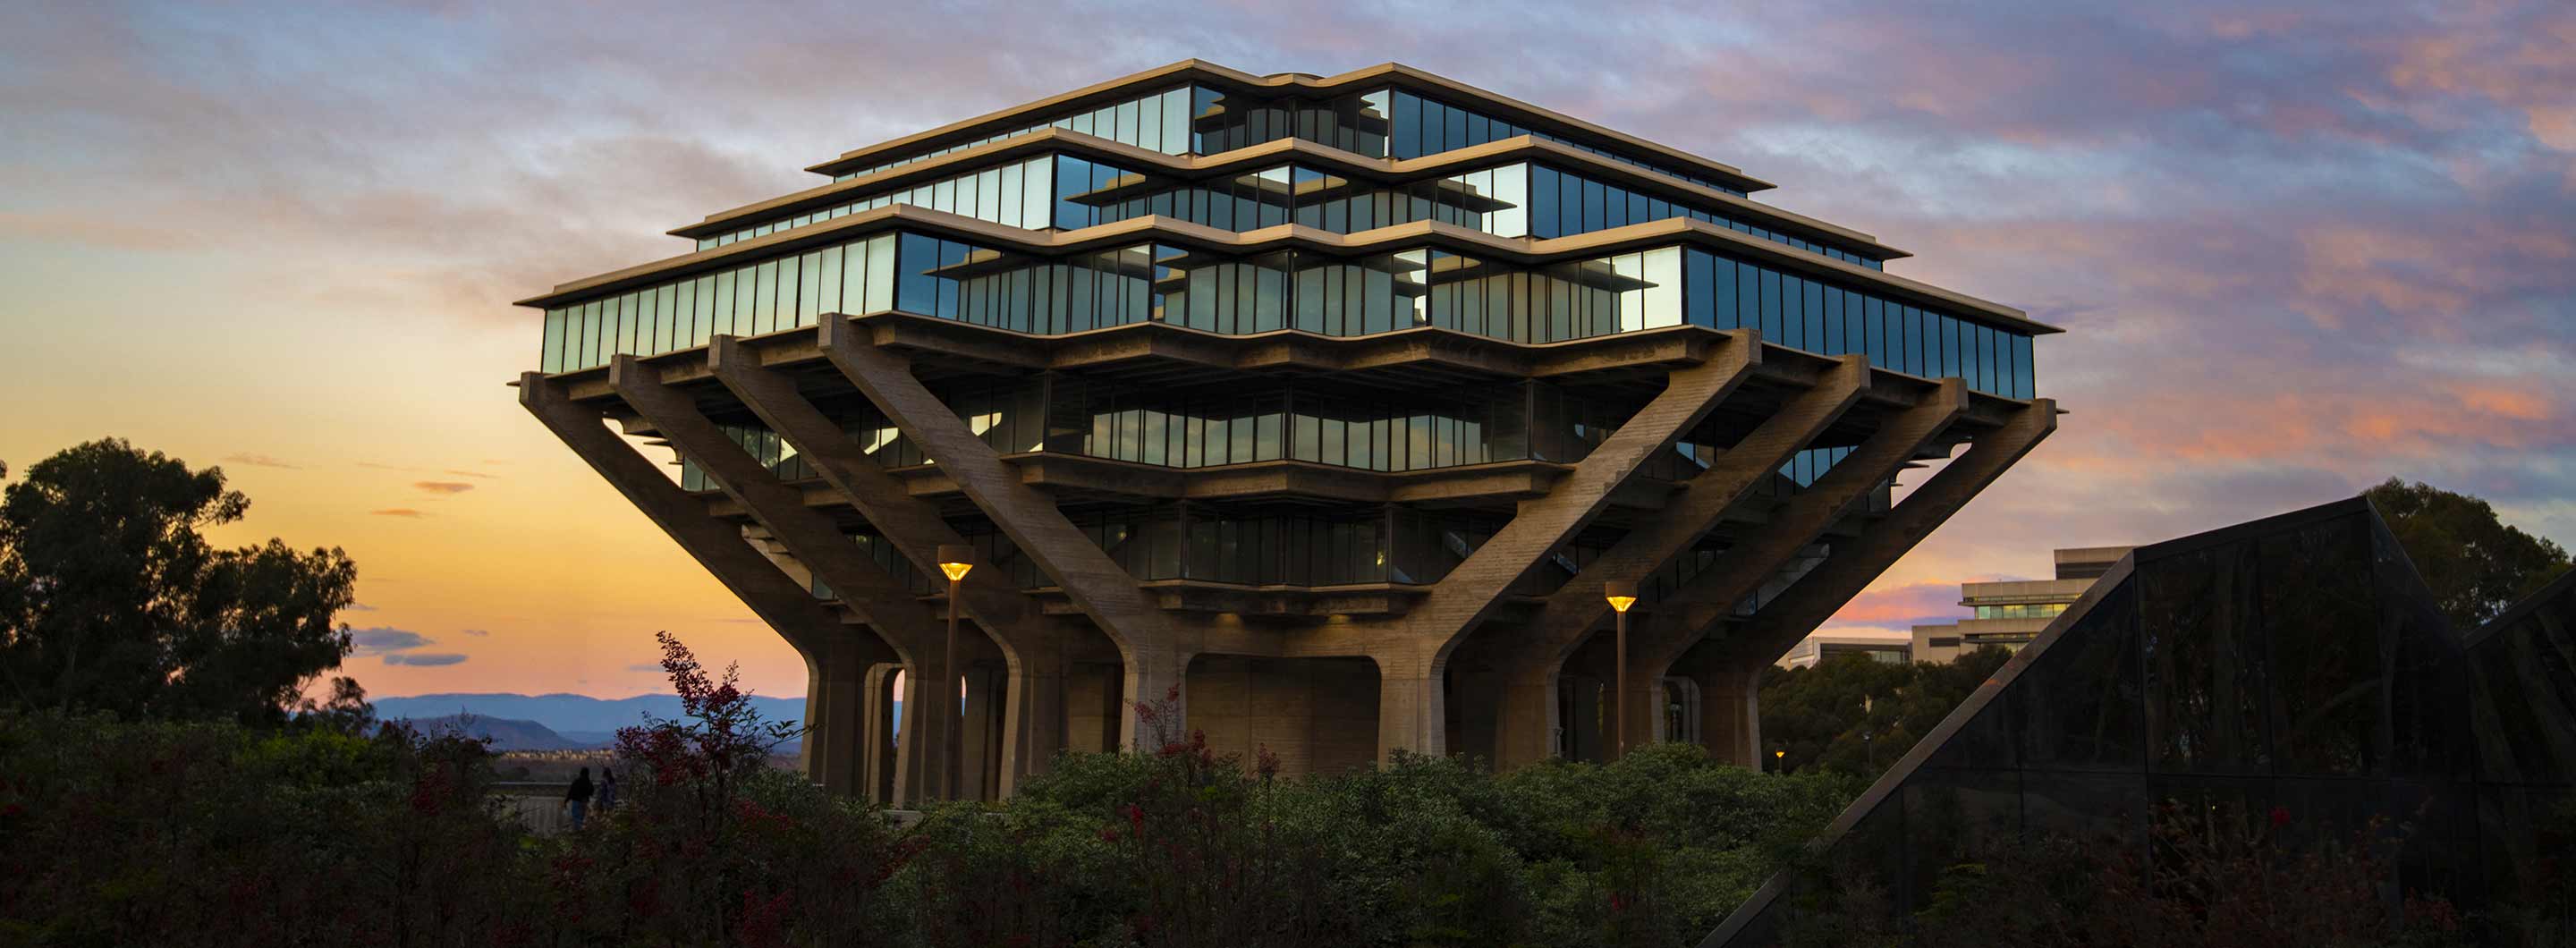 UC San Diego library at dusk